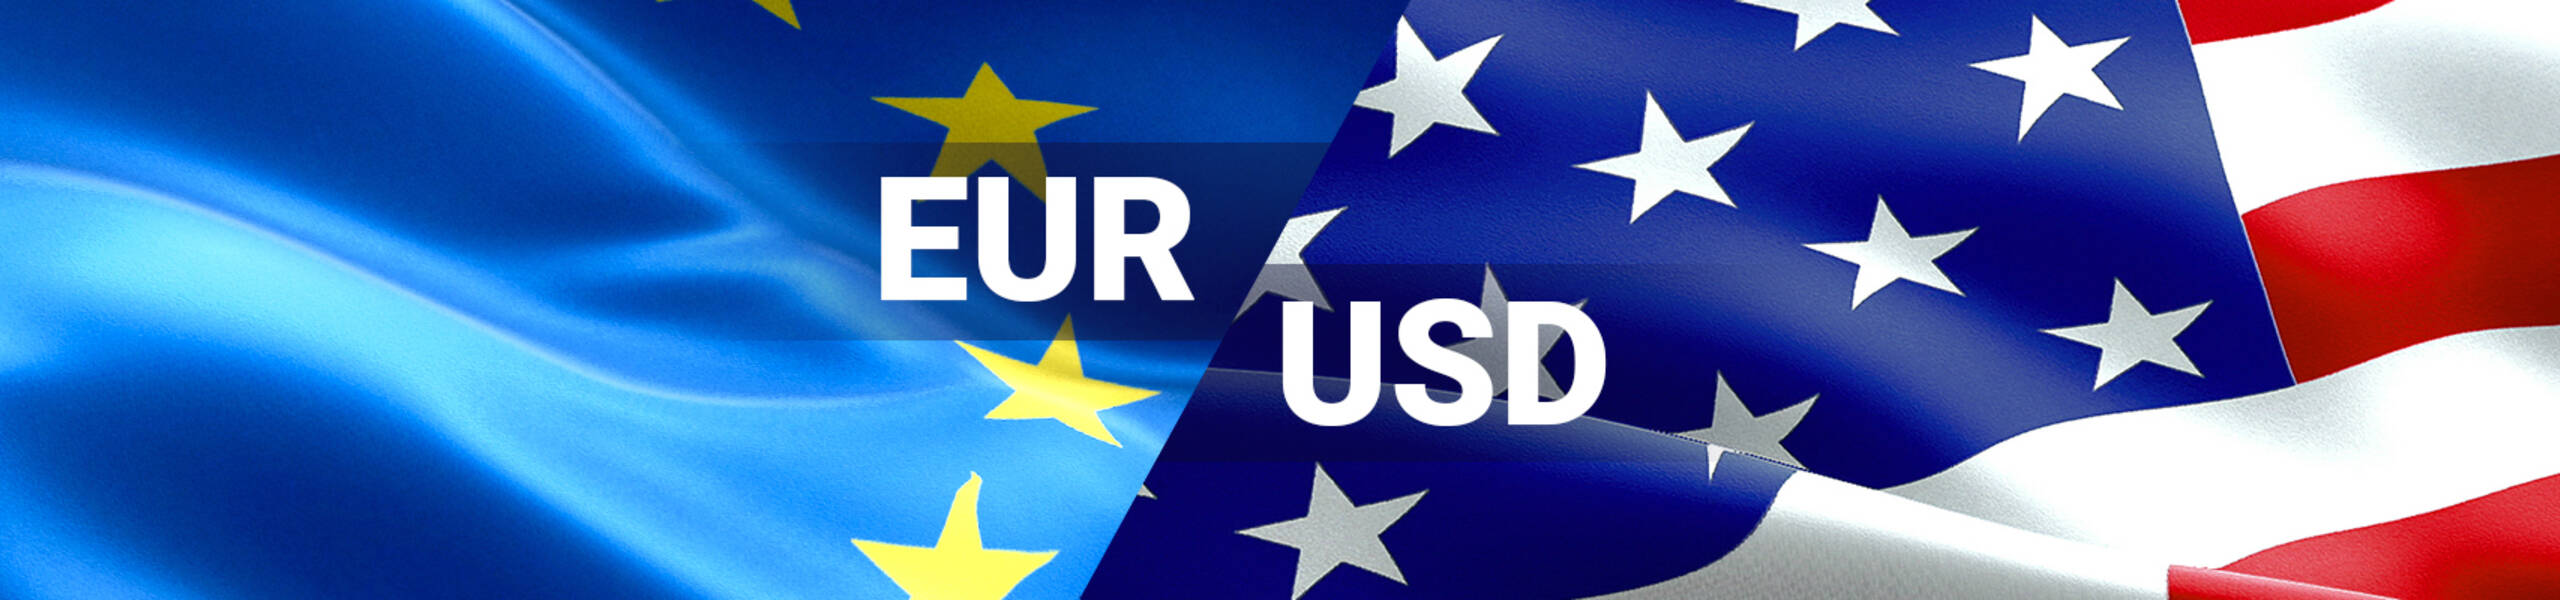 EUR/USD favored by the bullish price action